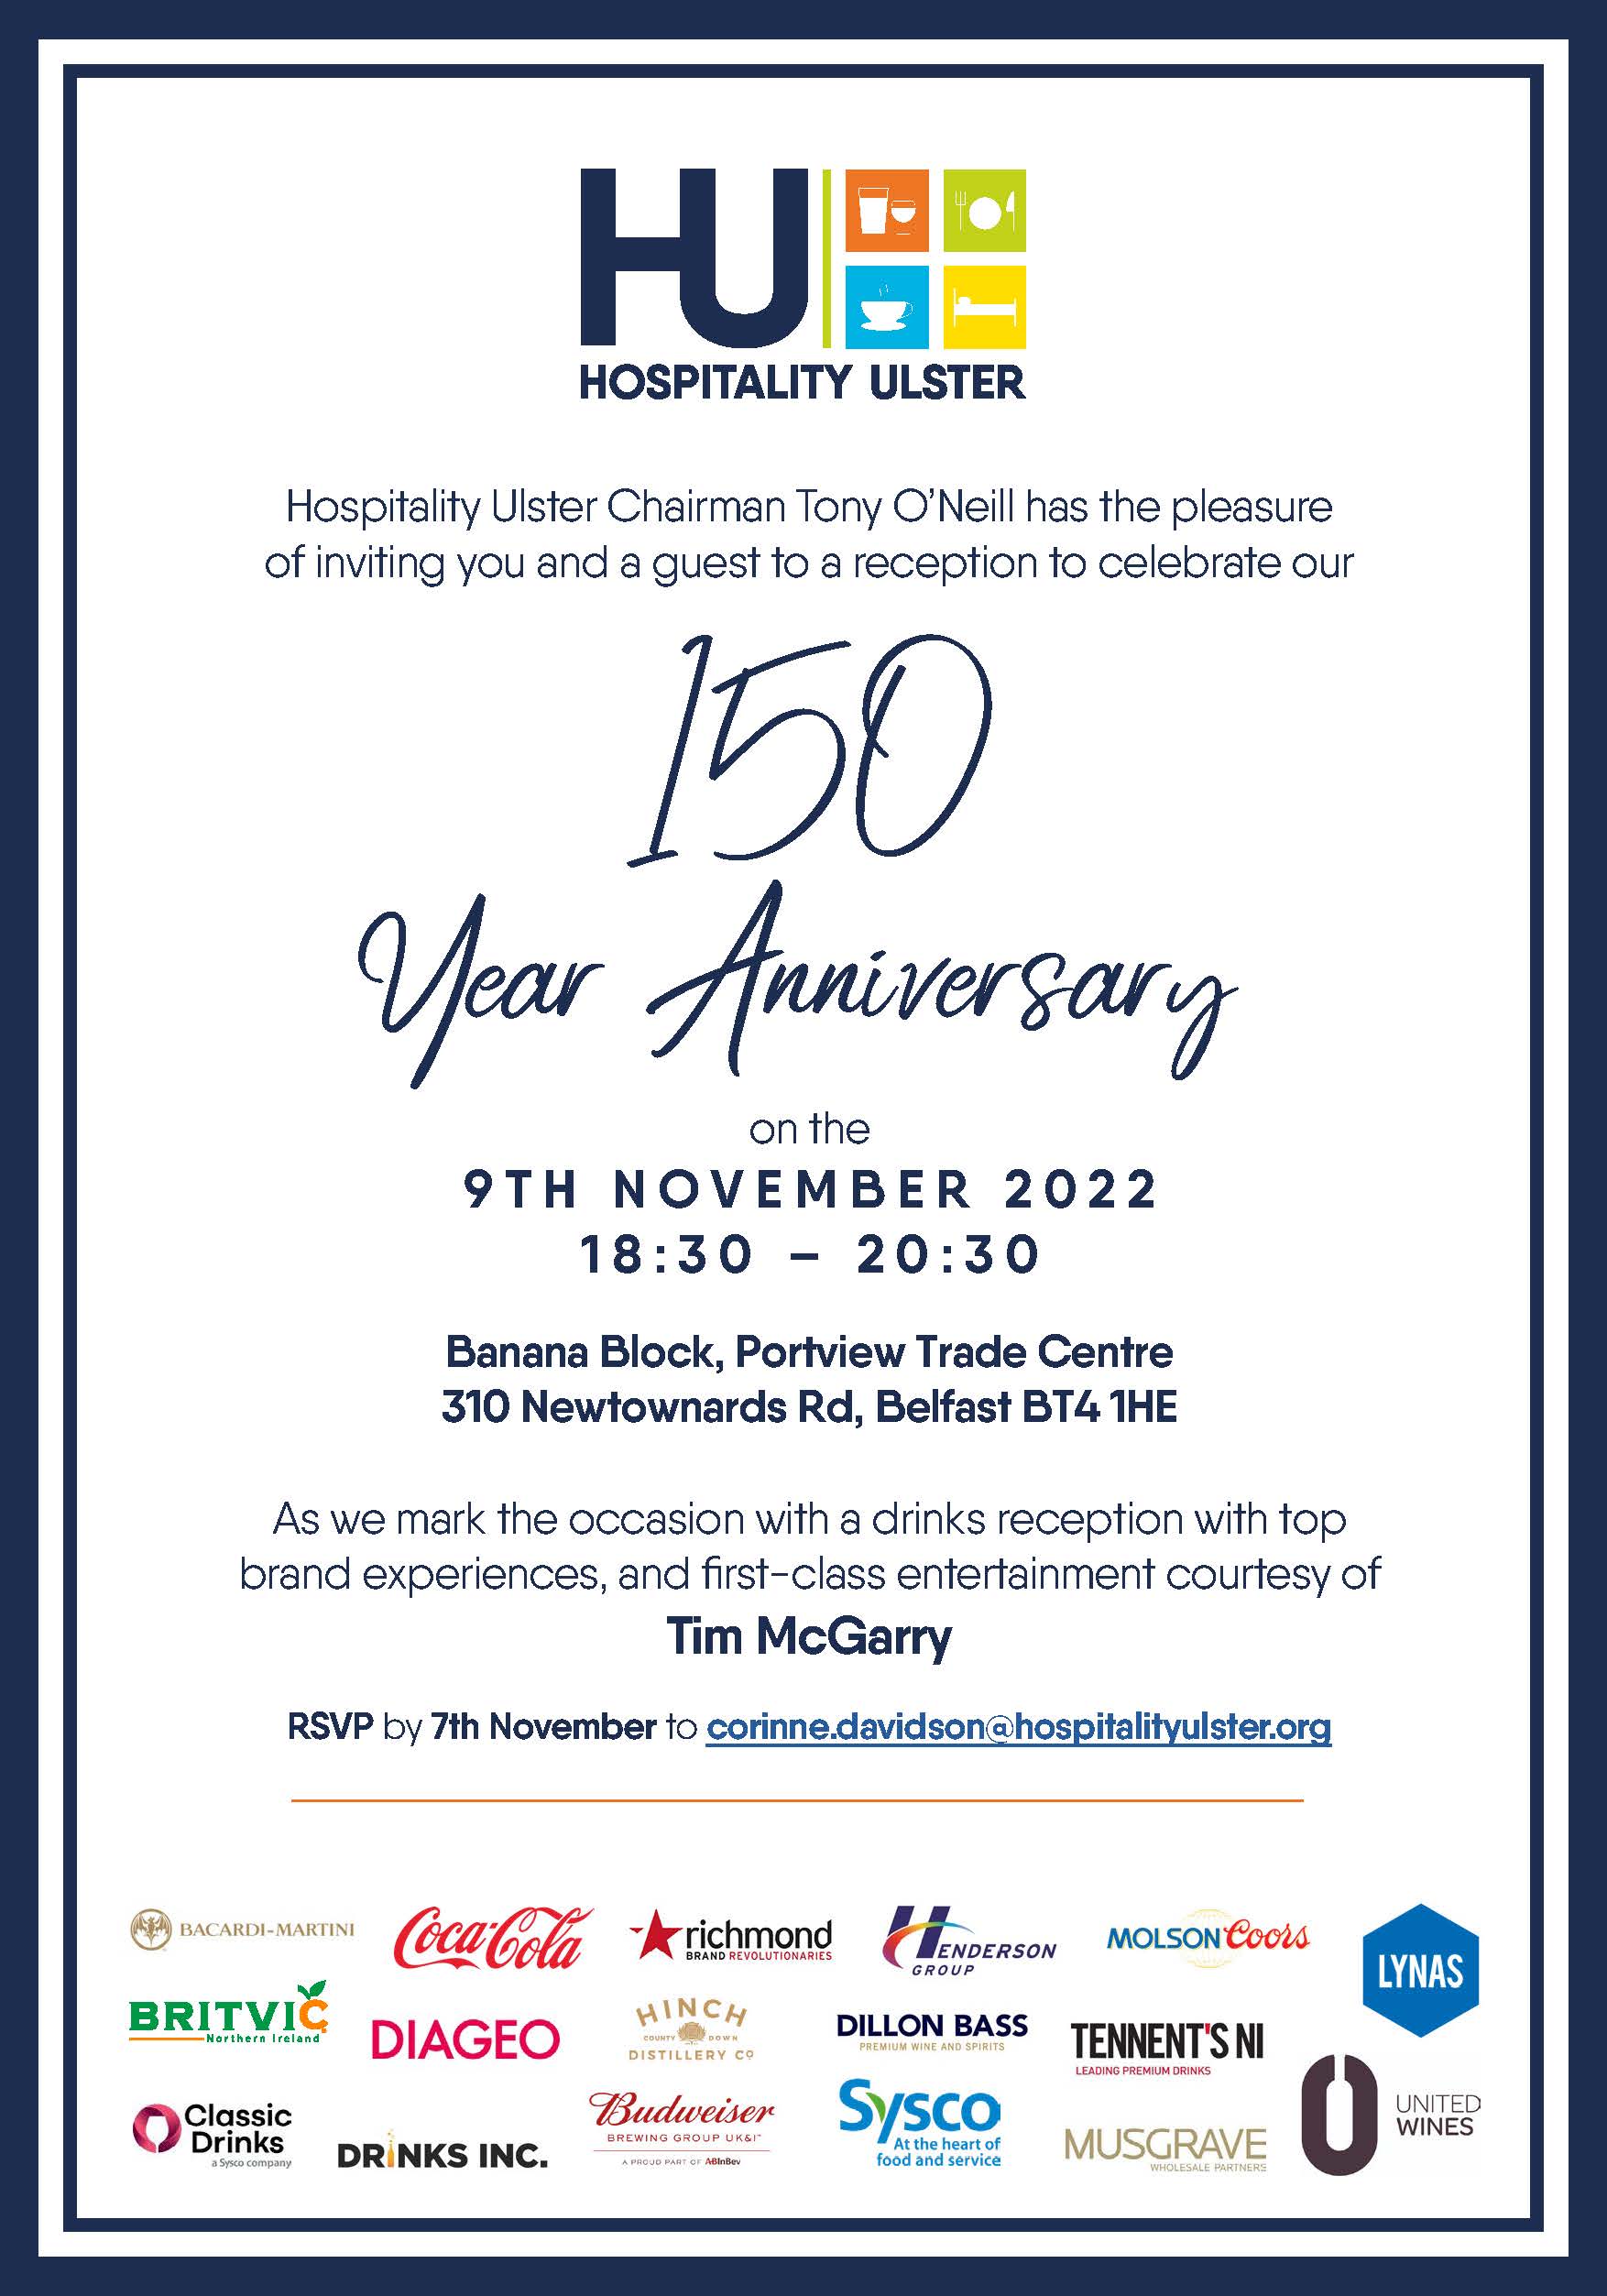 BRING YOUR STAFF - DRINKS FOOD AND ENTERTAINMENT ON US AS HU CELEBRATES TURNING 150